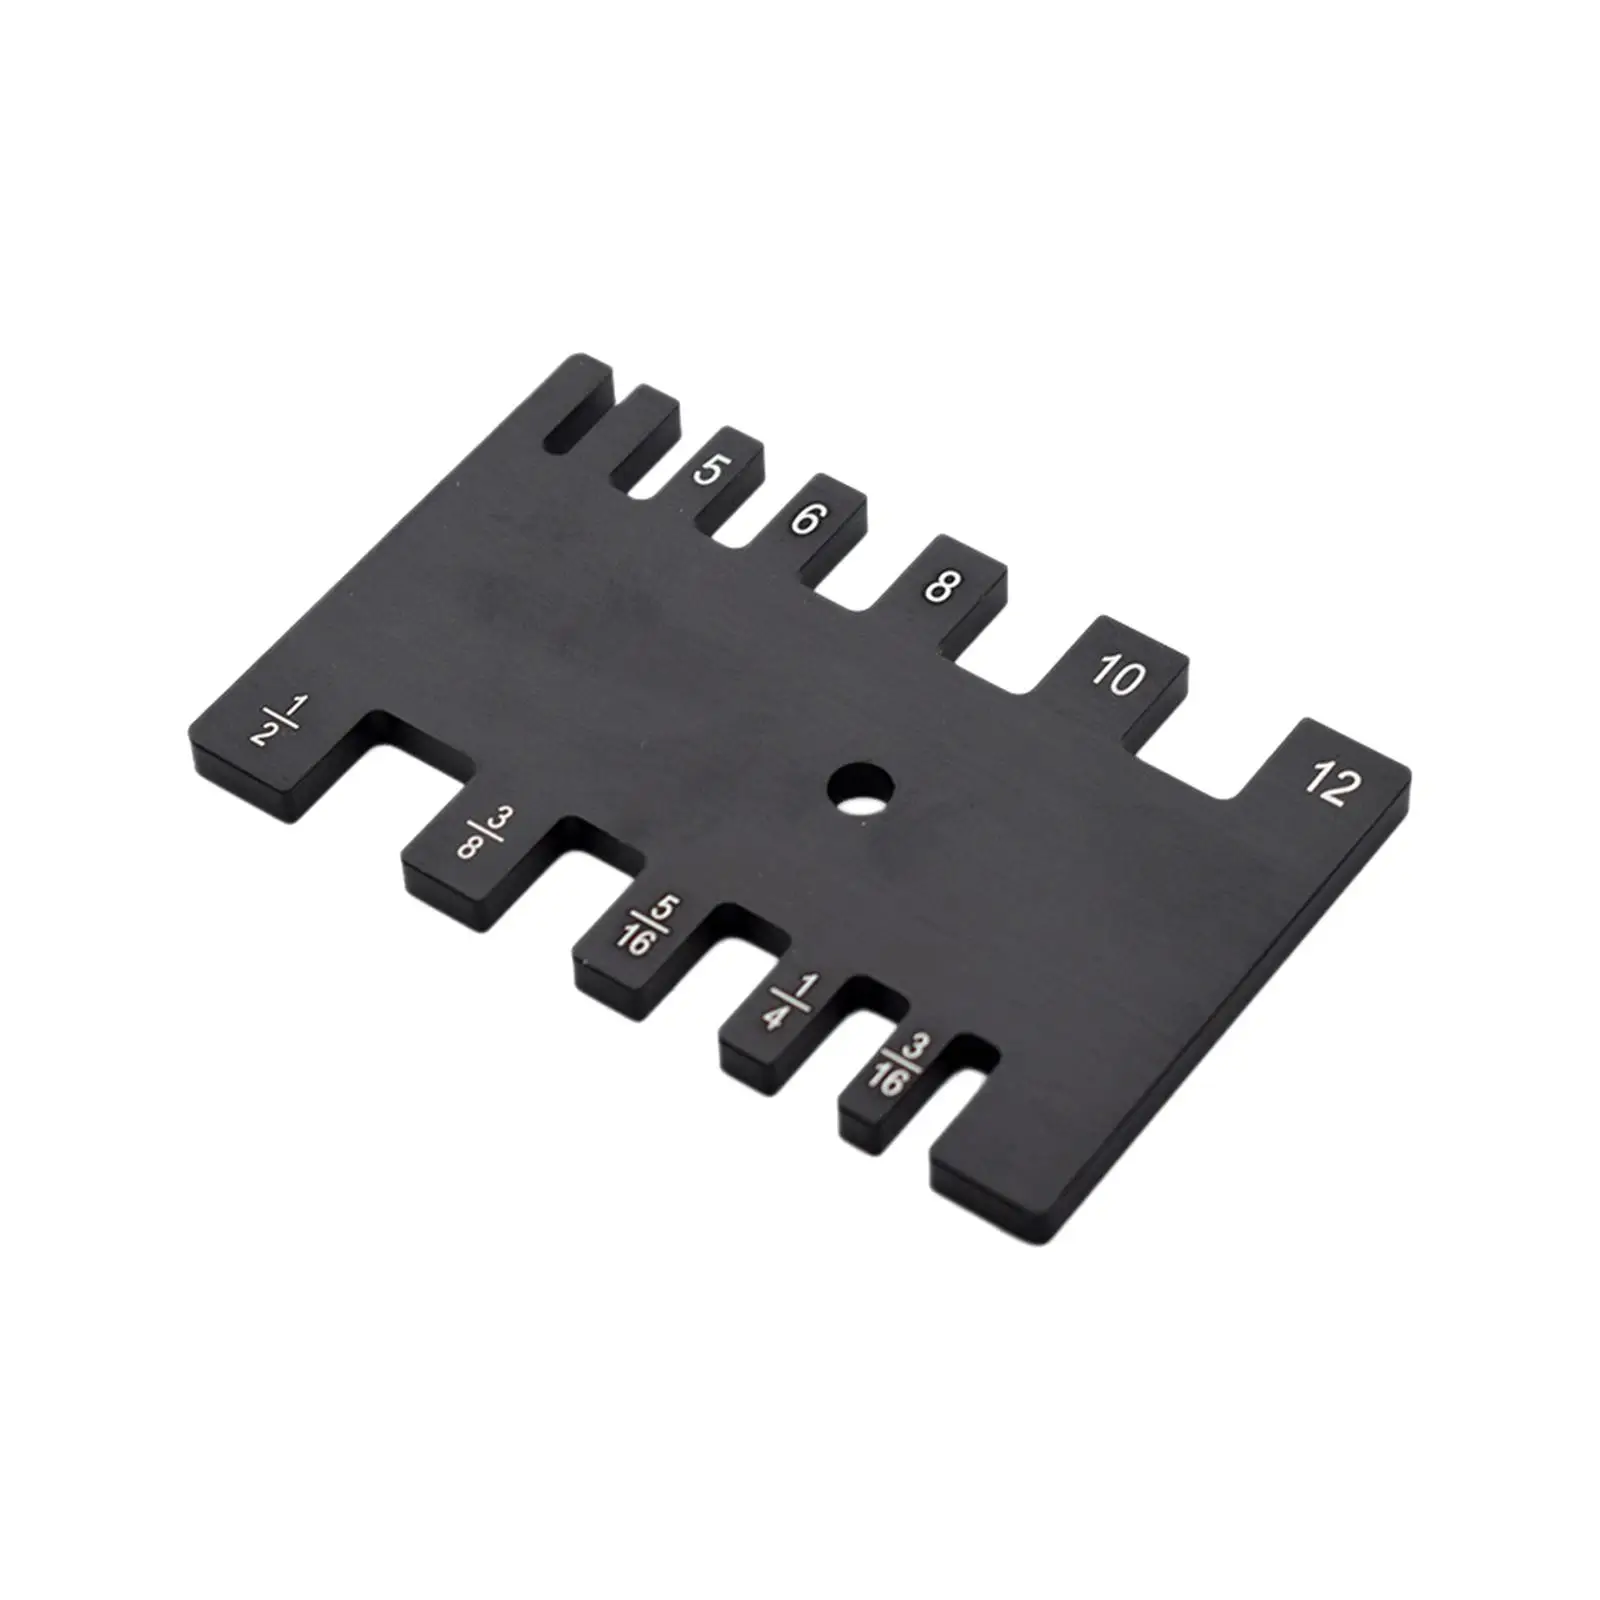 Aluminium Router Table Insert Plate Fence Sliding Brackets Trimmer Tools Sliding Brackets for Woodworking Engraving Machine Tool